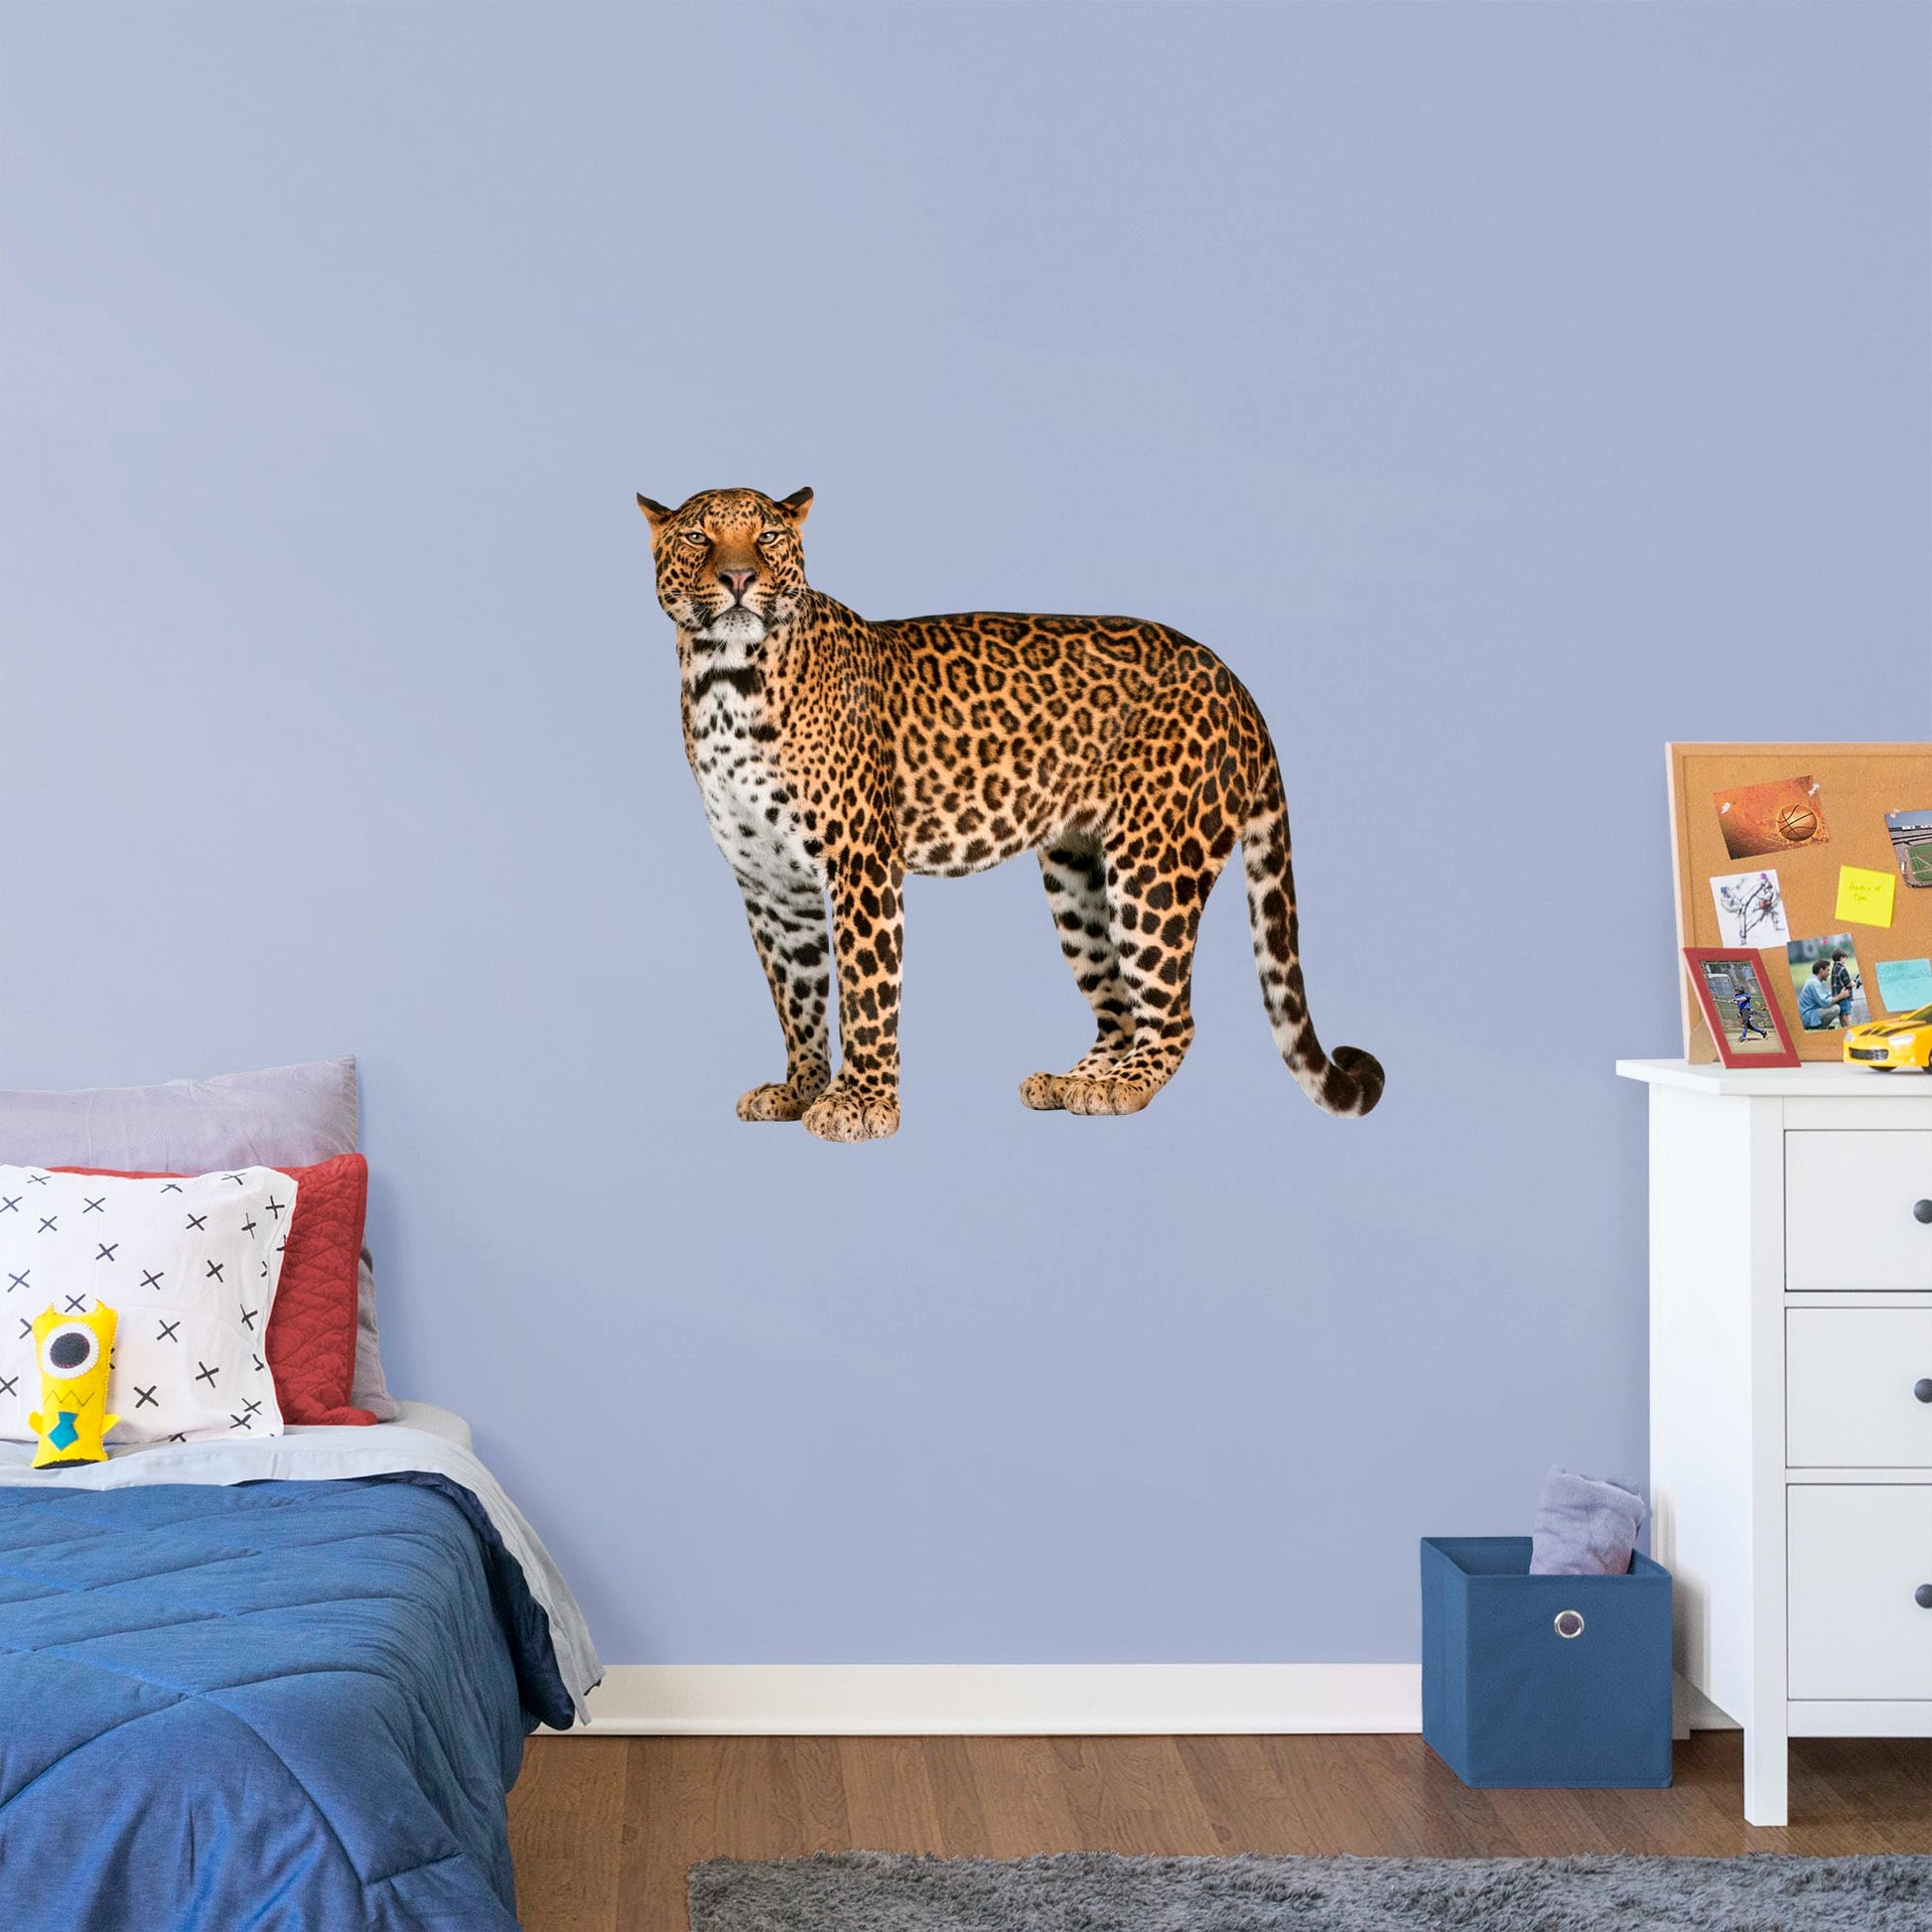 Giant Animal + 2 Decals (44"W x 39"H)